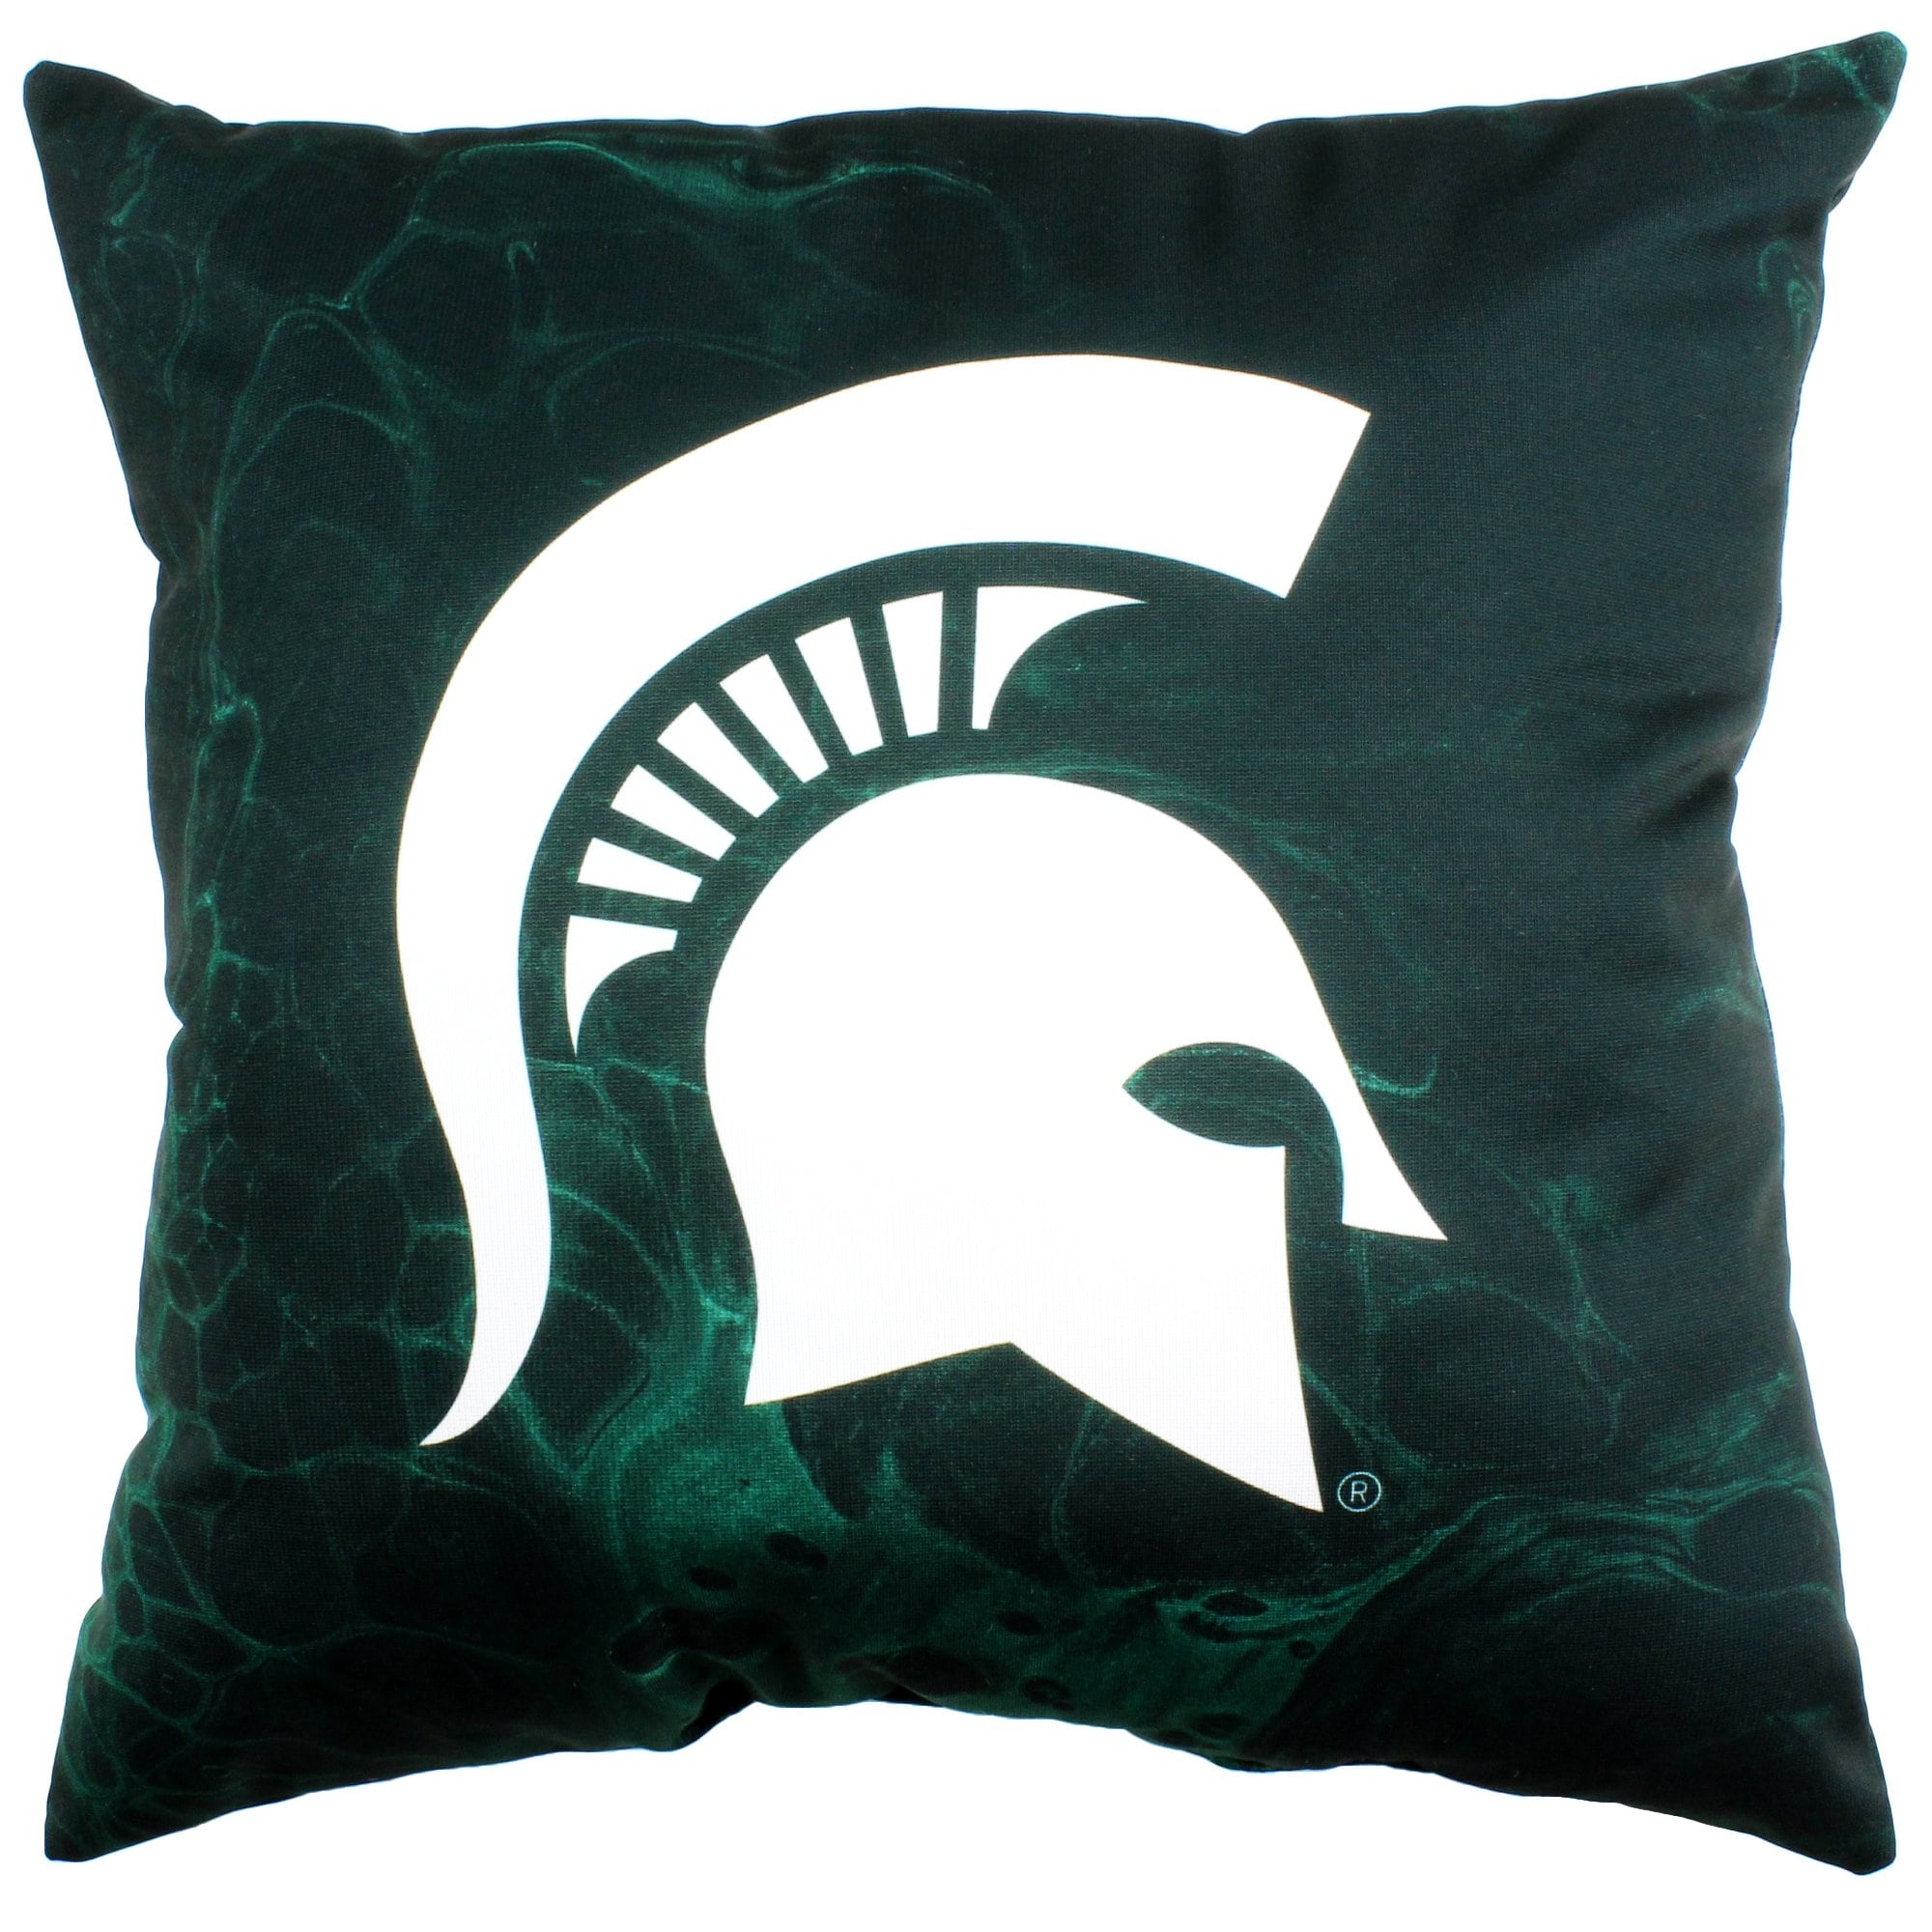 https://ak1.ostkcdn.com/images/products/is/images/direct/bd8b8d96fd193d43df0f02b0413228f5dd69f60e/Michigan-State-Spartans-2-Sided-Decorative-Pillow%2C-16%22-x-16%22%2C-Made-in-the-USA.jpg